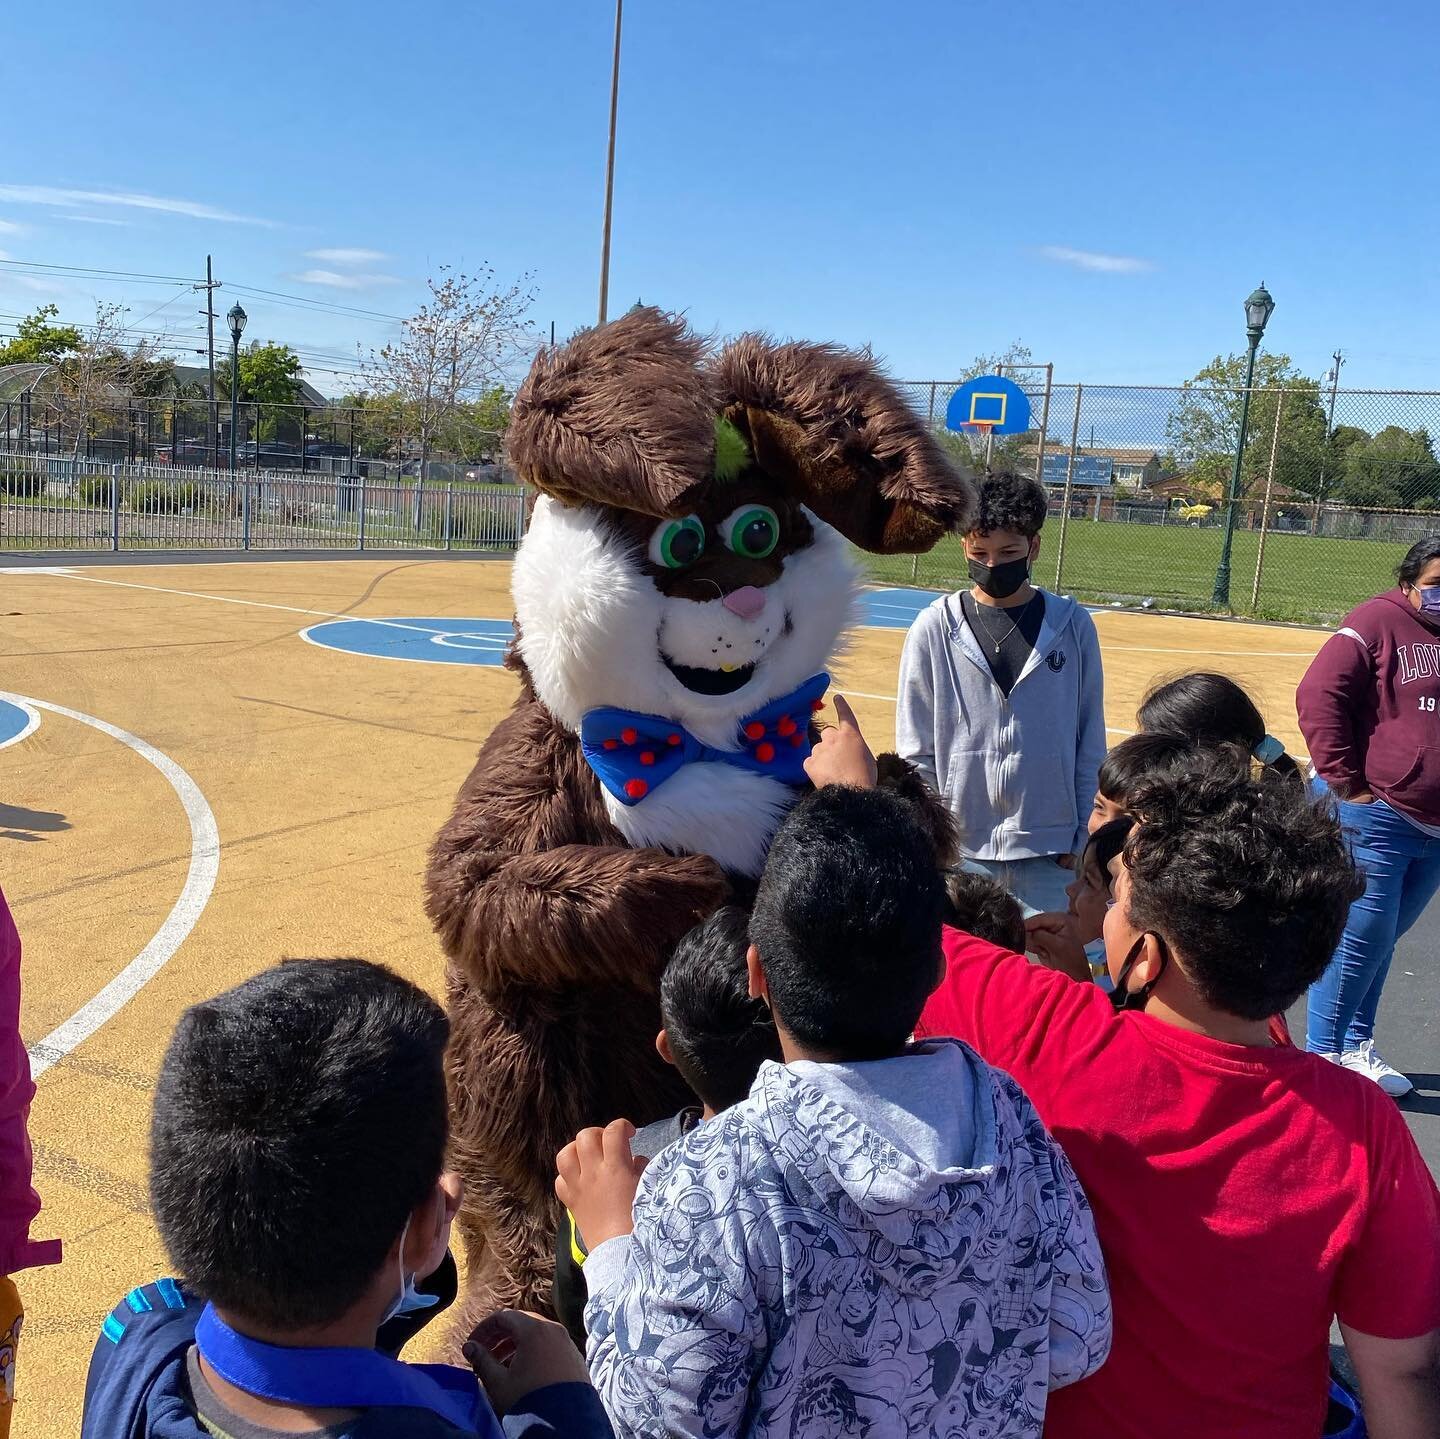 What an amazing Egg hunt last week with the kids from Shields Reid Community center!

Huge thanks to our collaborators such as community leaders @im_spazzin, Erin, Steve from Desk for Kids, Bgccc, Richmond Guardians of Justice, Michelle Milam and the